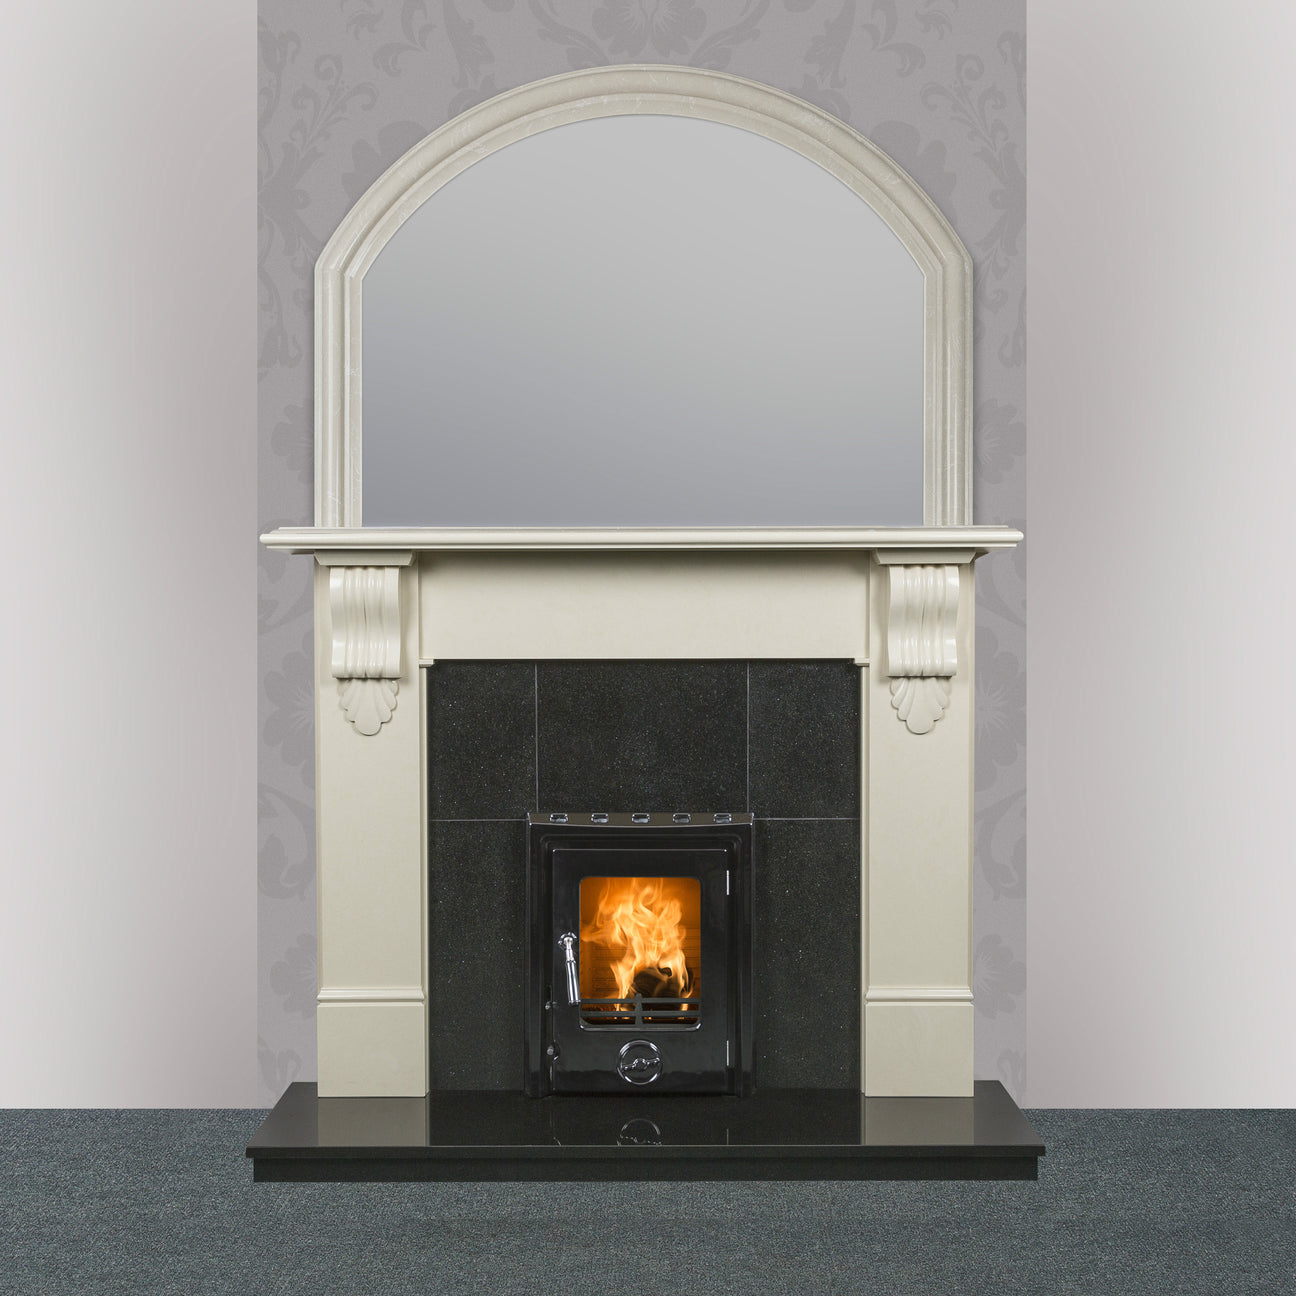 Image of Victoria Marble Fireplace in Ivory Pearl finish with Kate Insert stove in black enamel